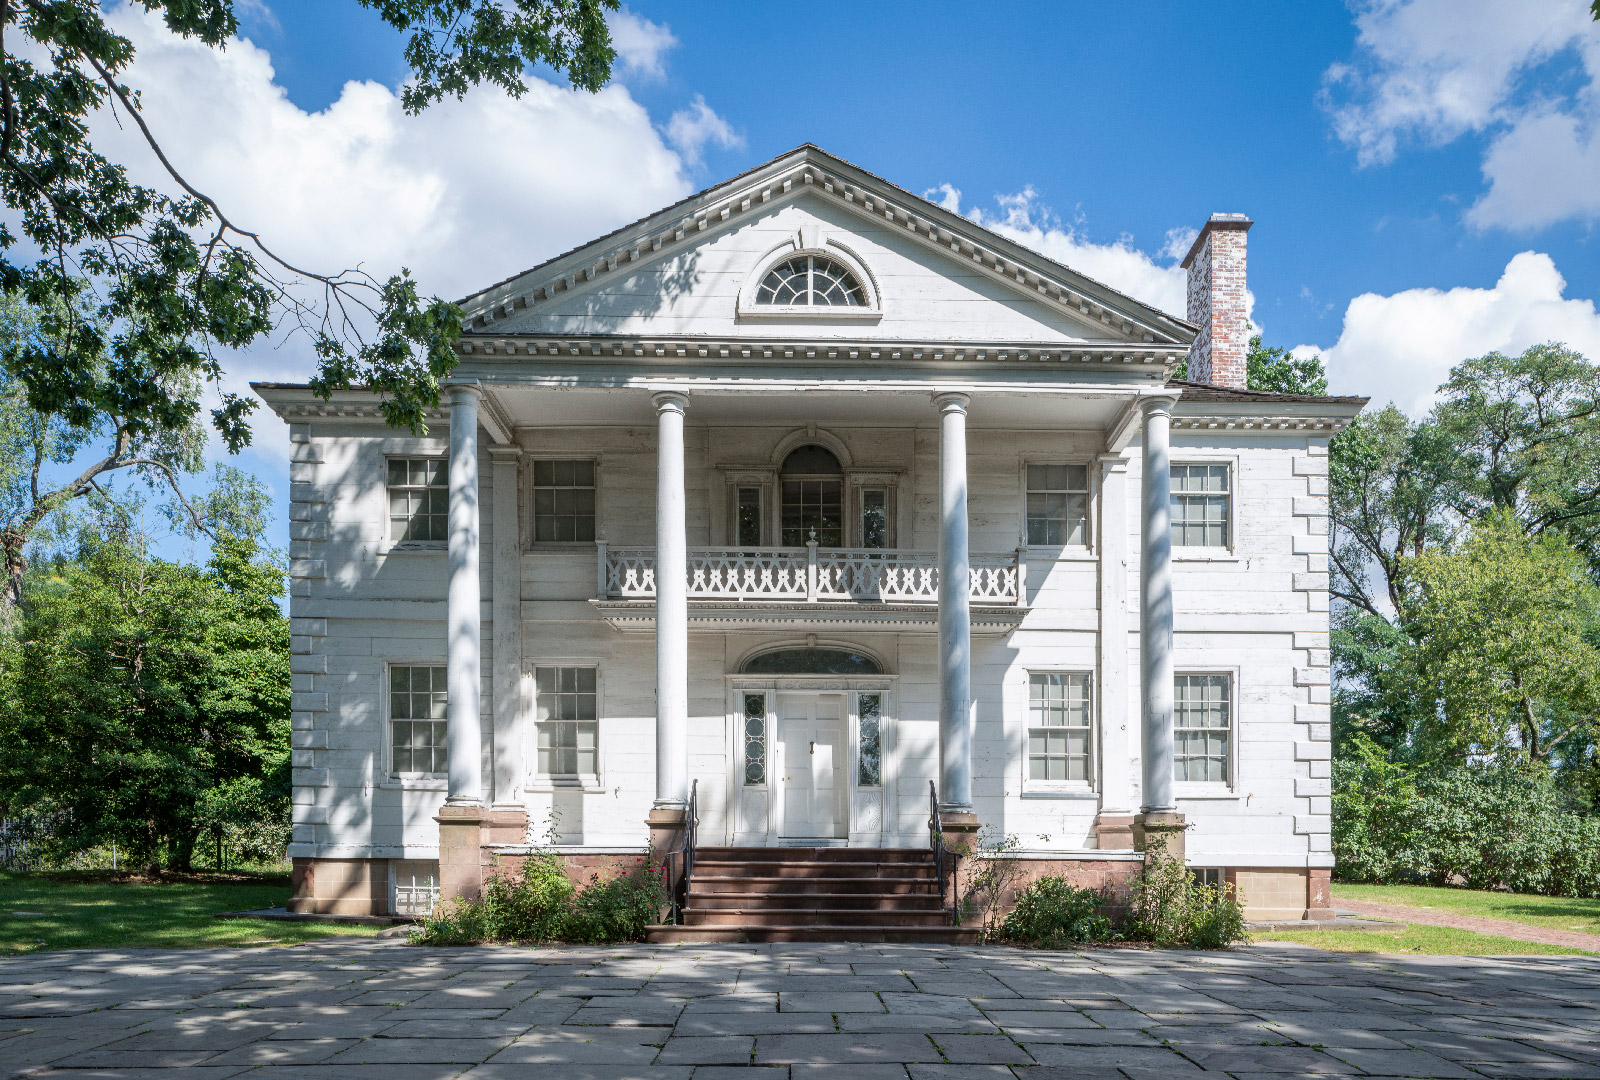 Photograph of the exterior front of Morris-Jumel Mansion on a sunny day